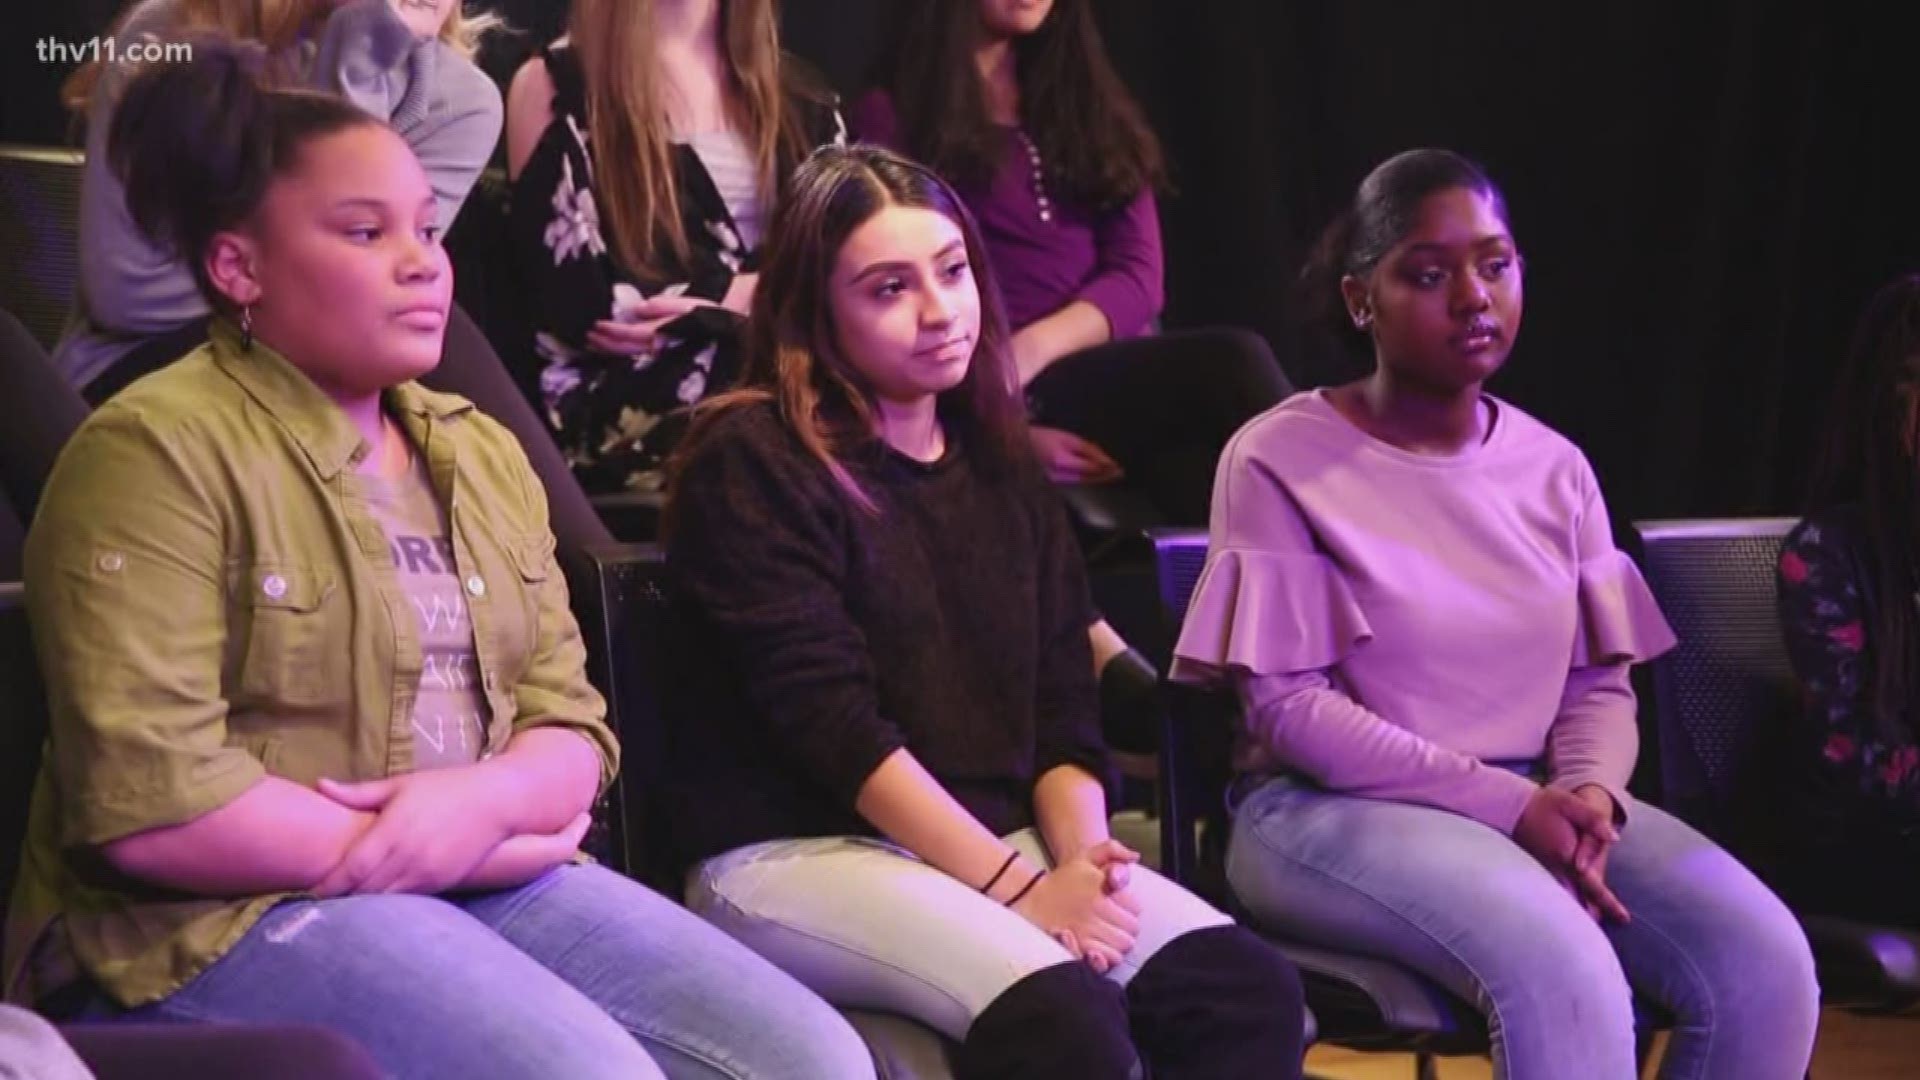 A story by our affiliate WZZM, a roundtable of girls talks about the pressures they feel concerning body image.